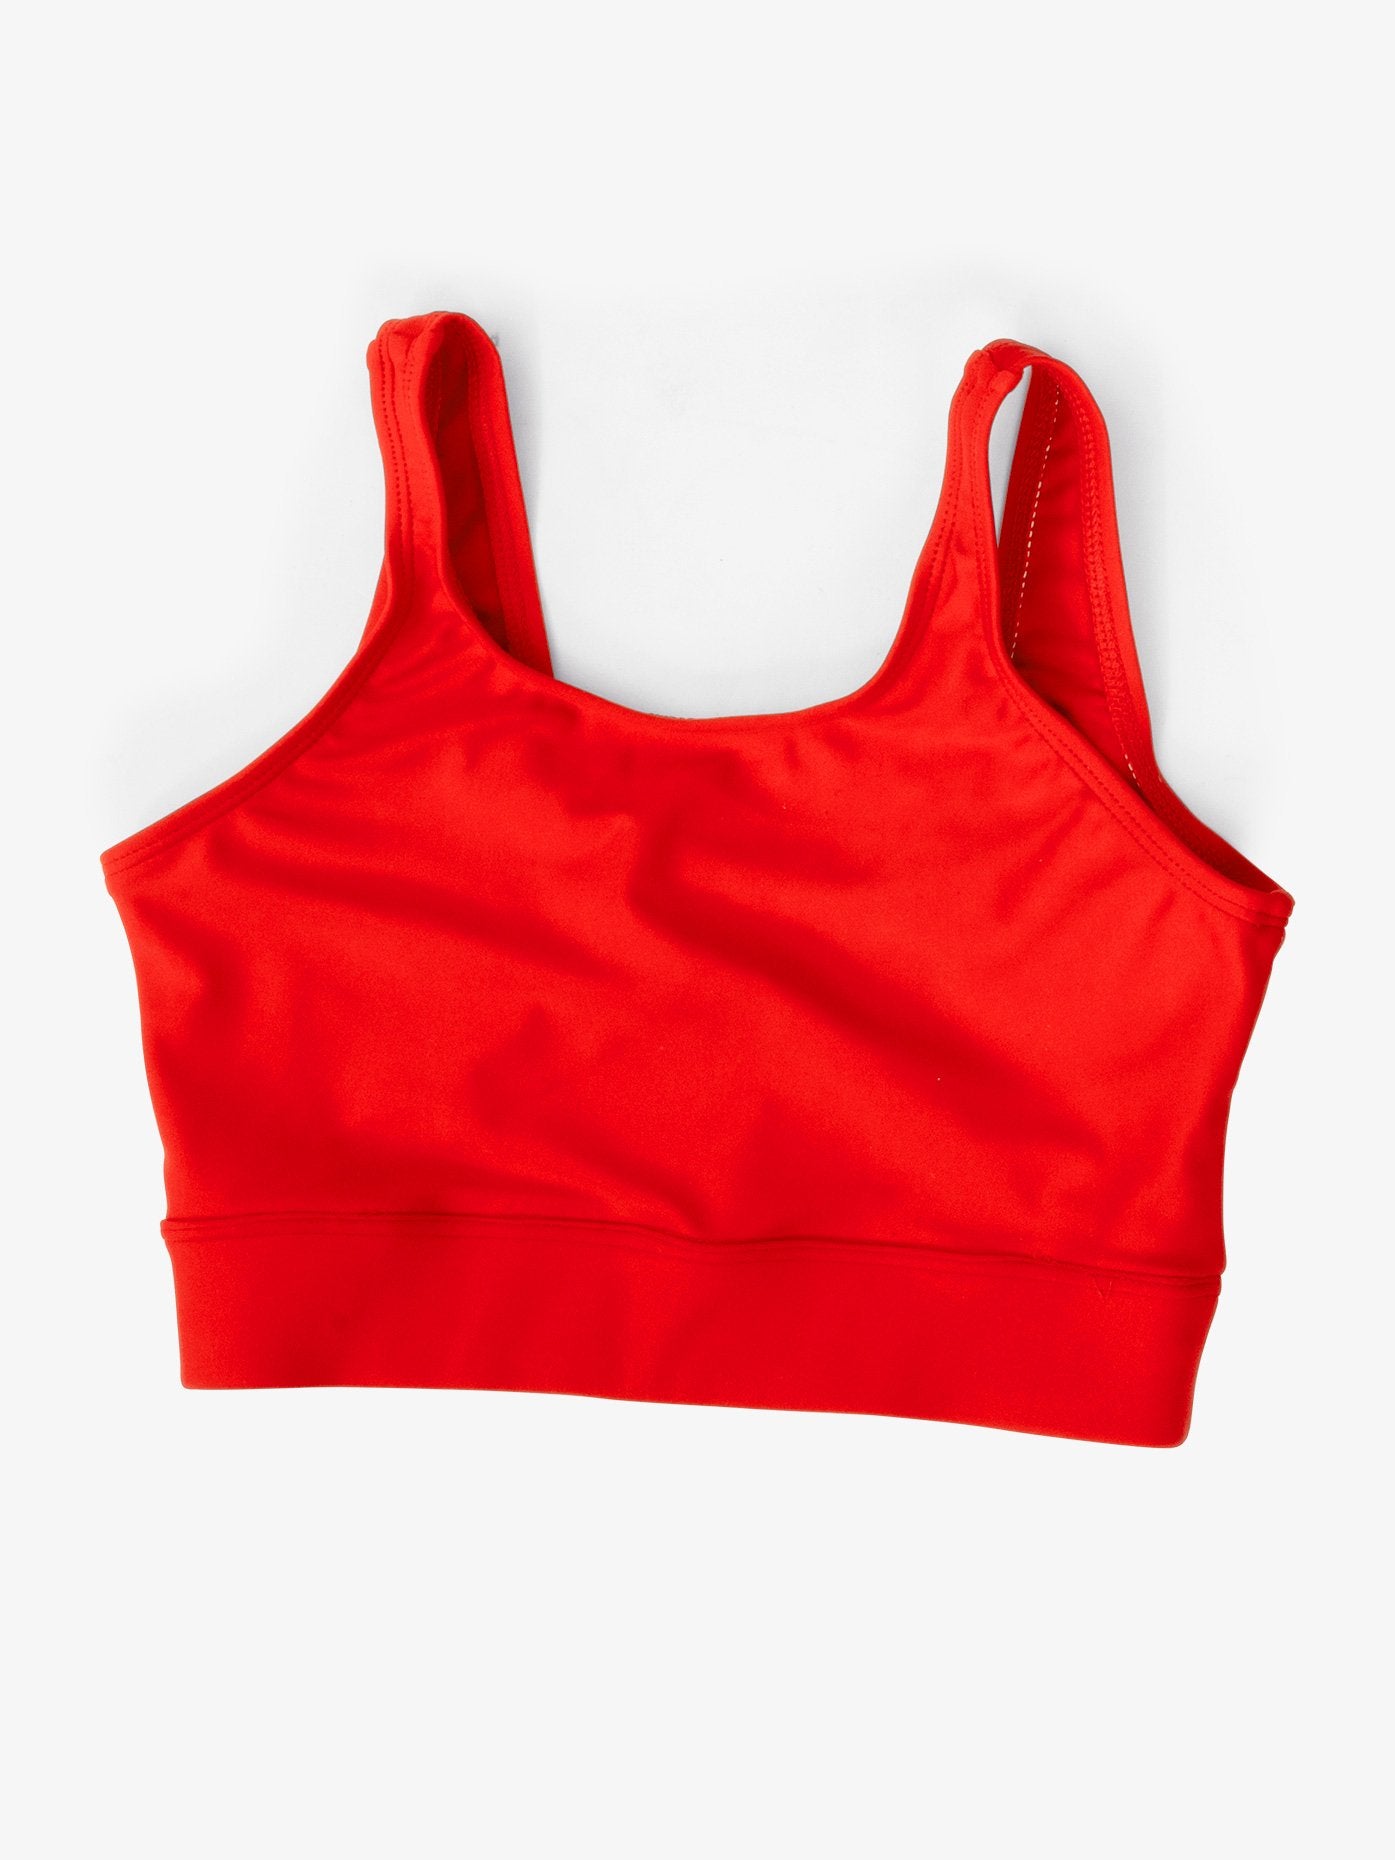 Women’s pinched back red bra top